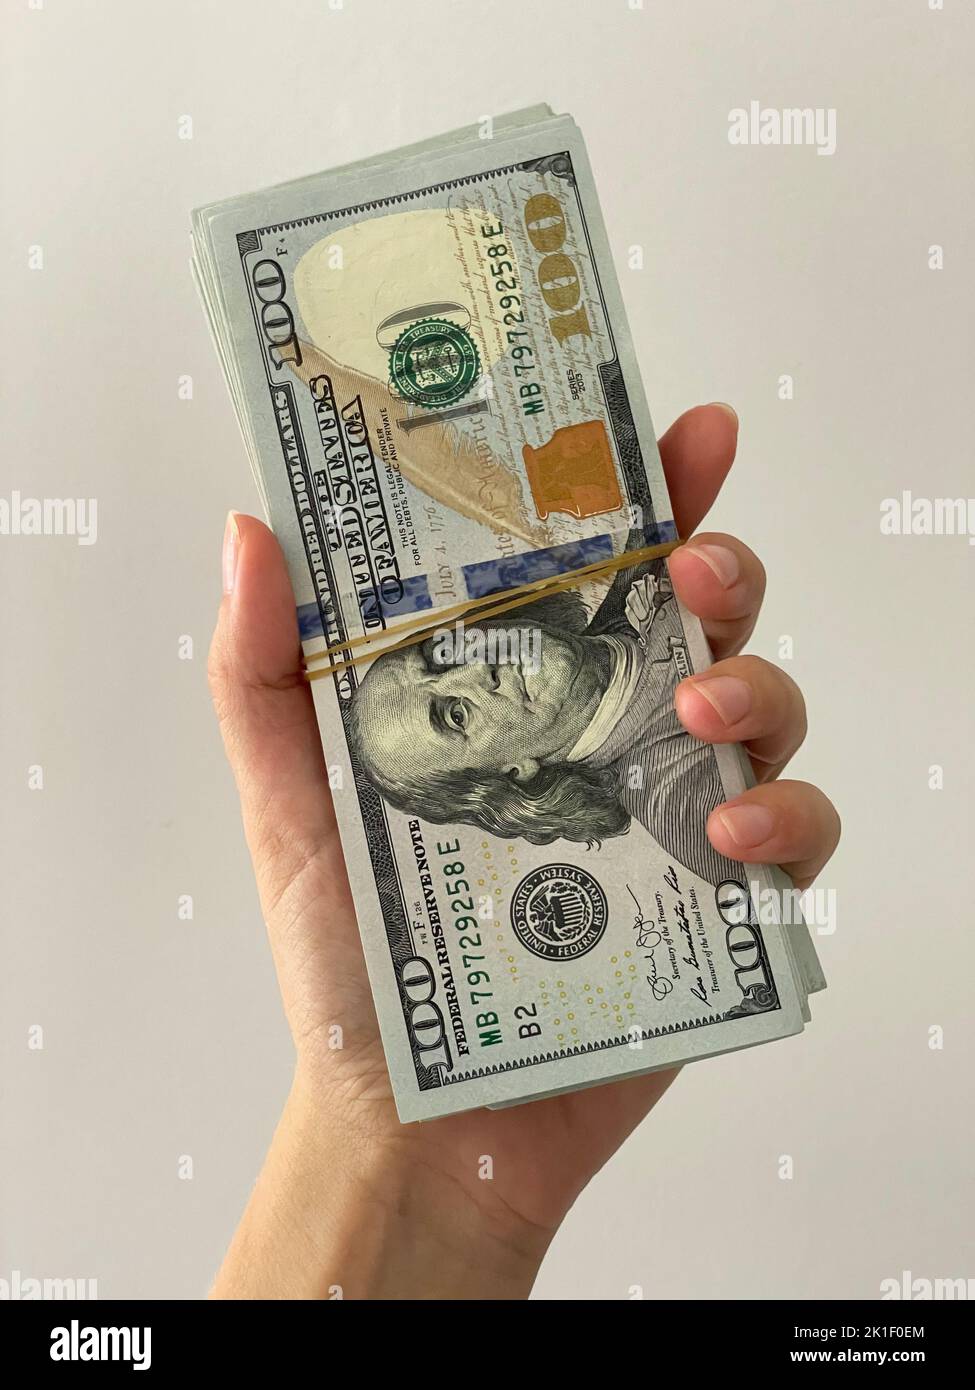 Woman holding a wad of money. Dollars in a hand Stock Photo